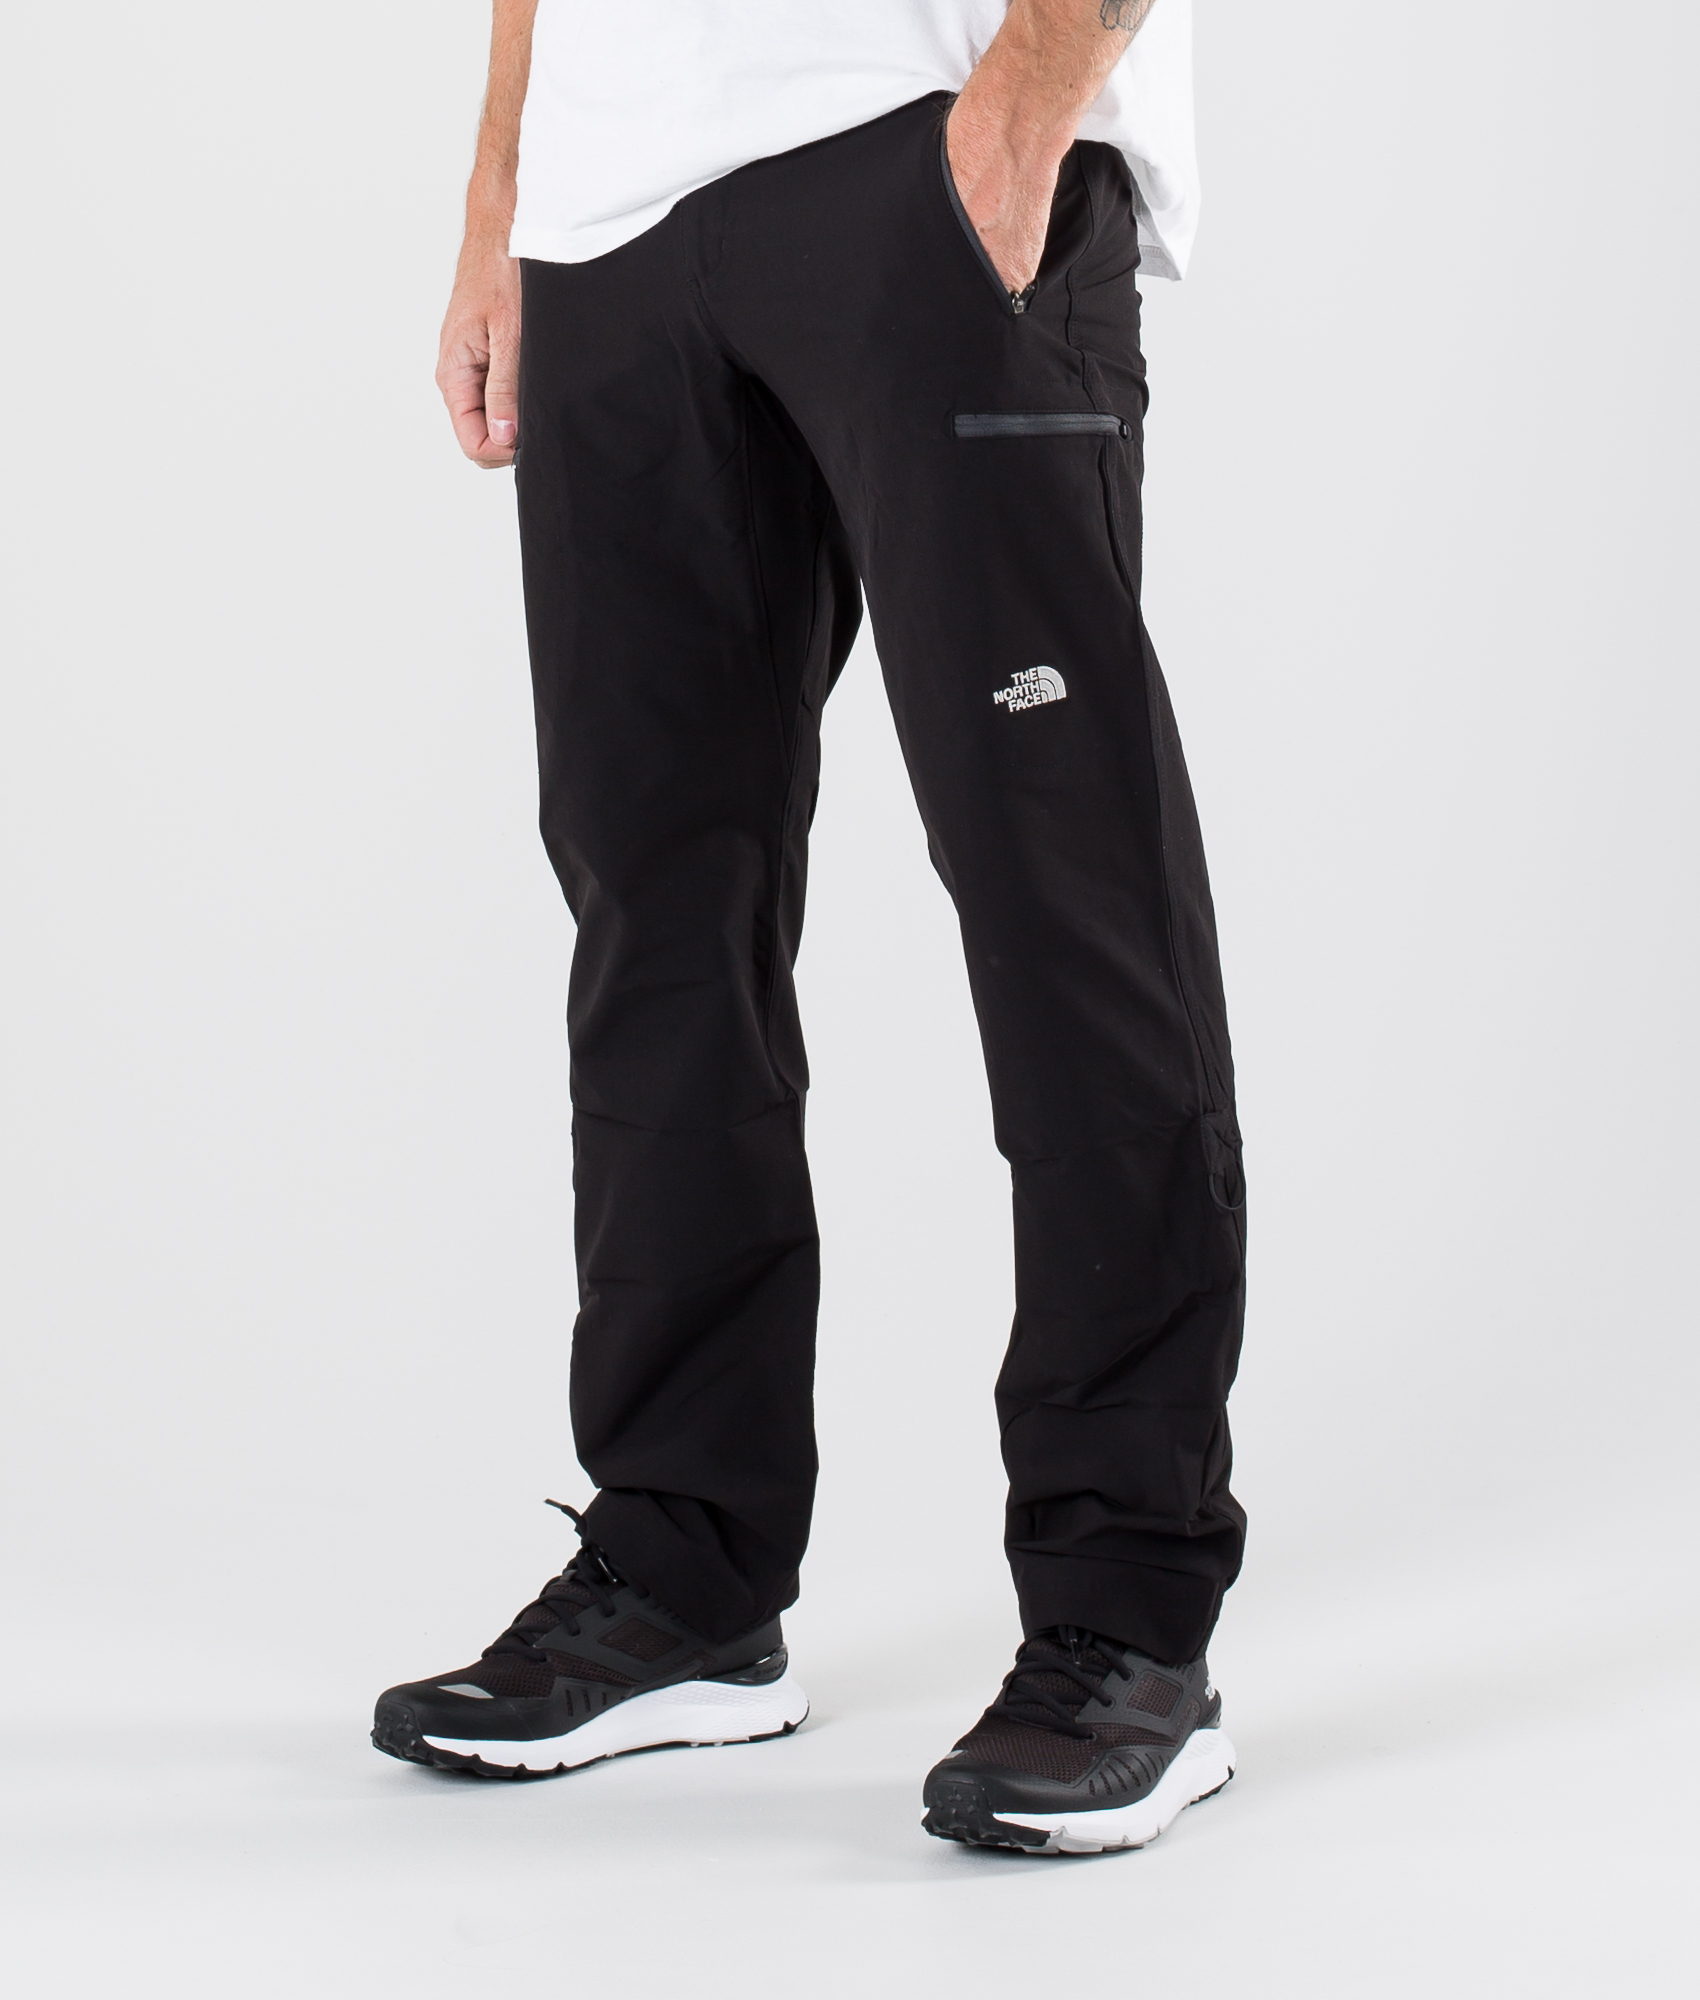 Sale > north face pants > in stock